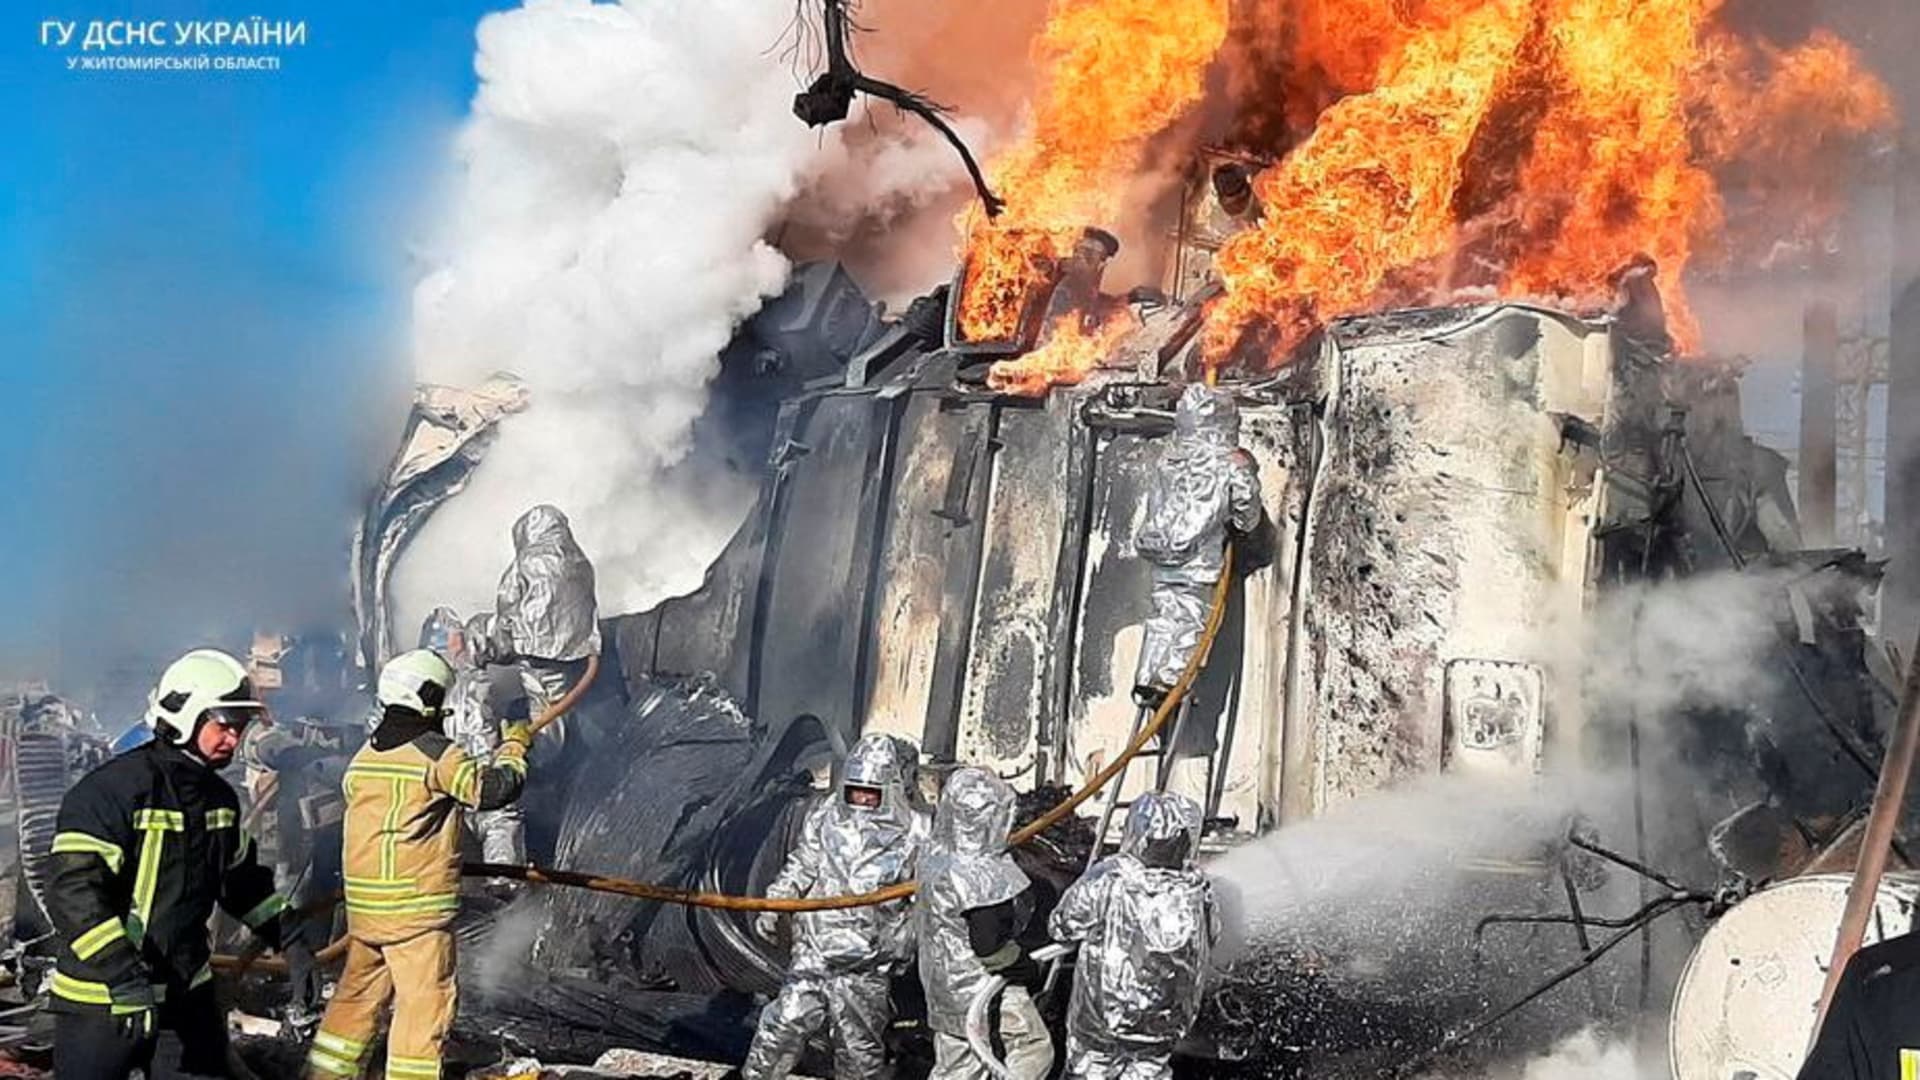 Firefighters work to put out a fire in an energy infrastructure facility, damaged by a Russian missile strike, as Russia's attack on Ukraine continues, in Zhytomyr, Ukraine, October 18, 2022.